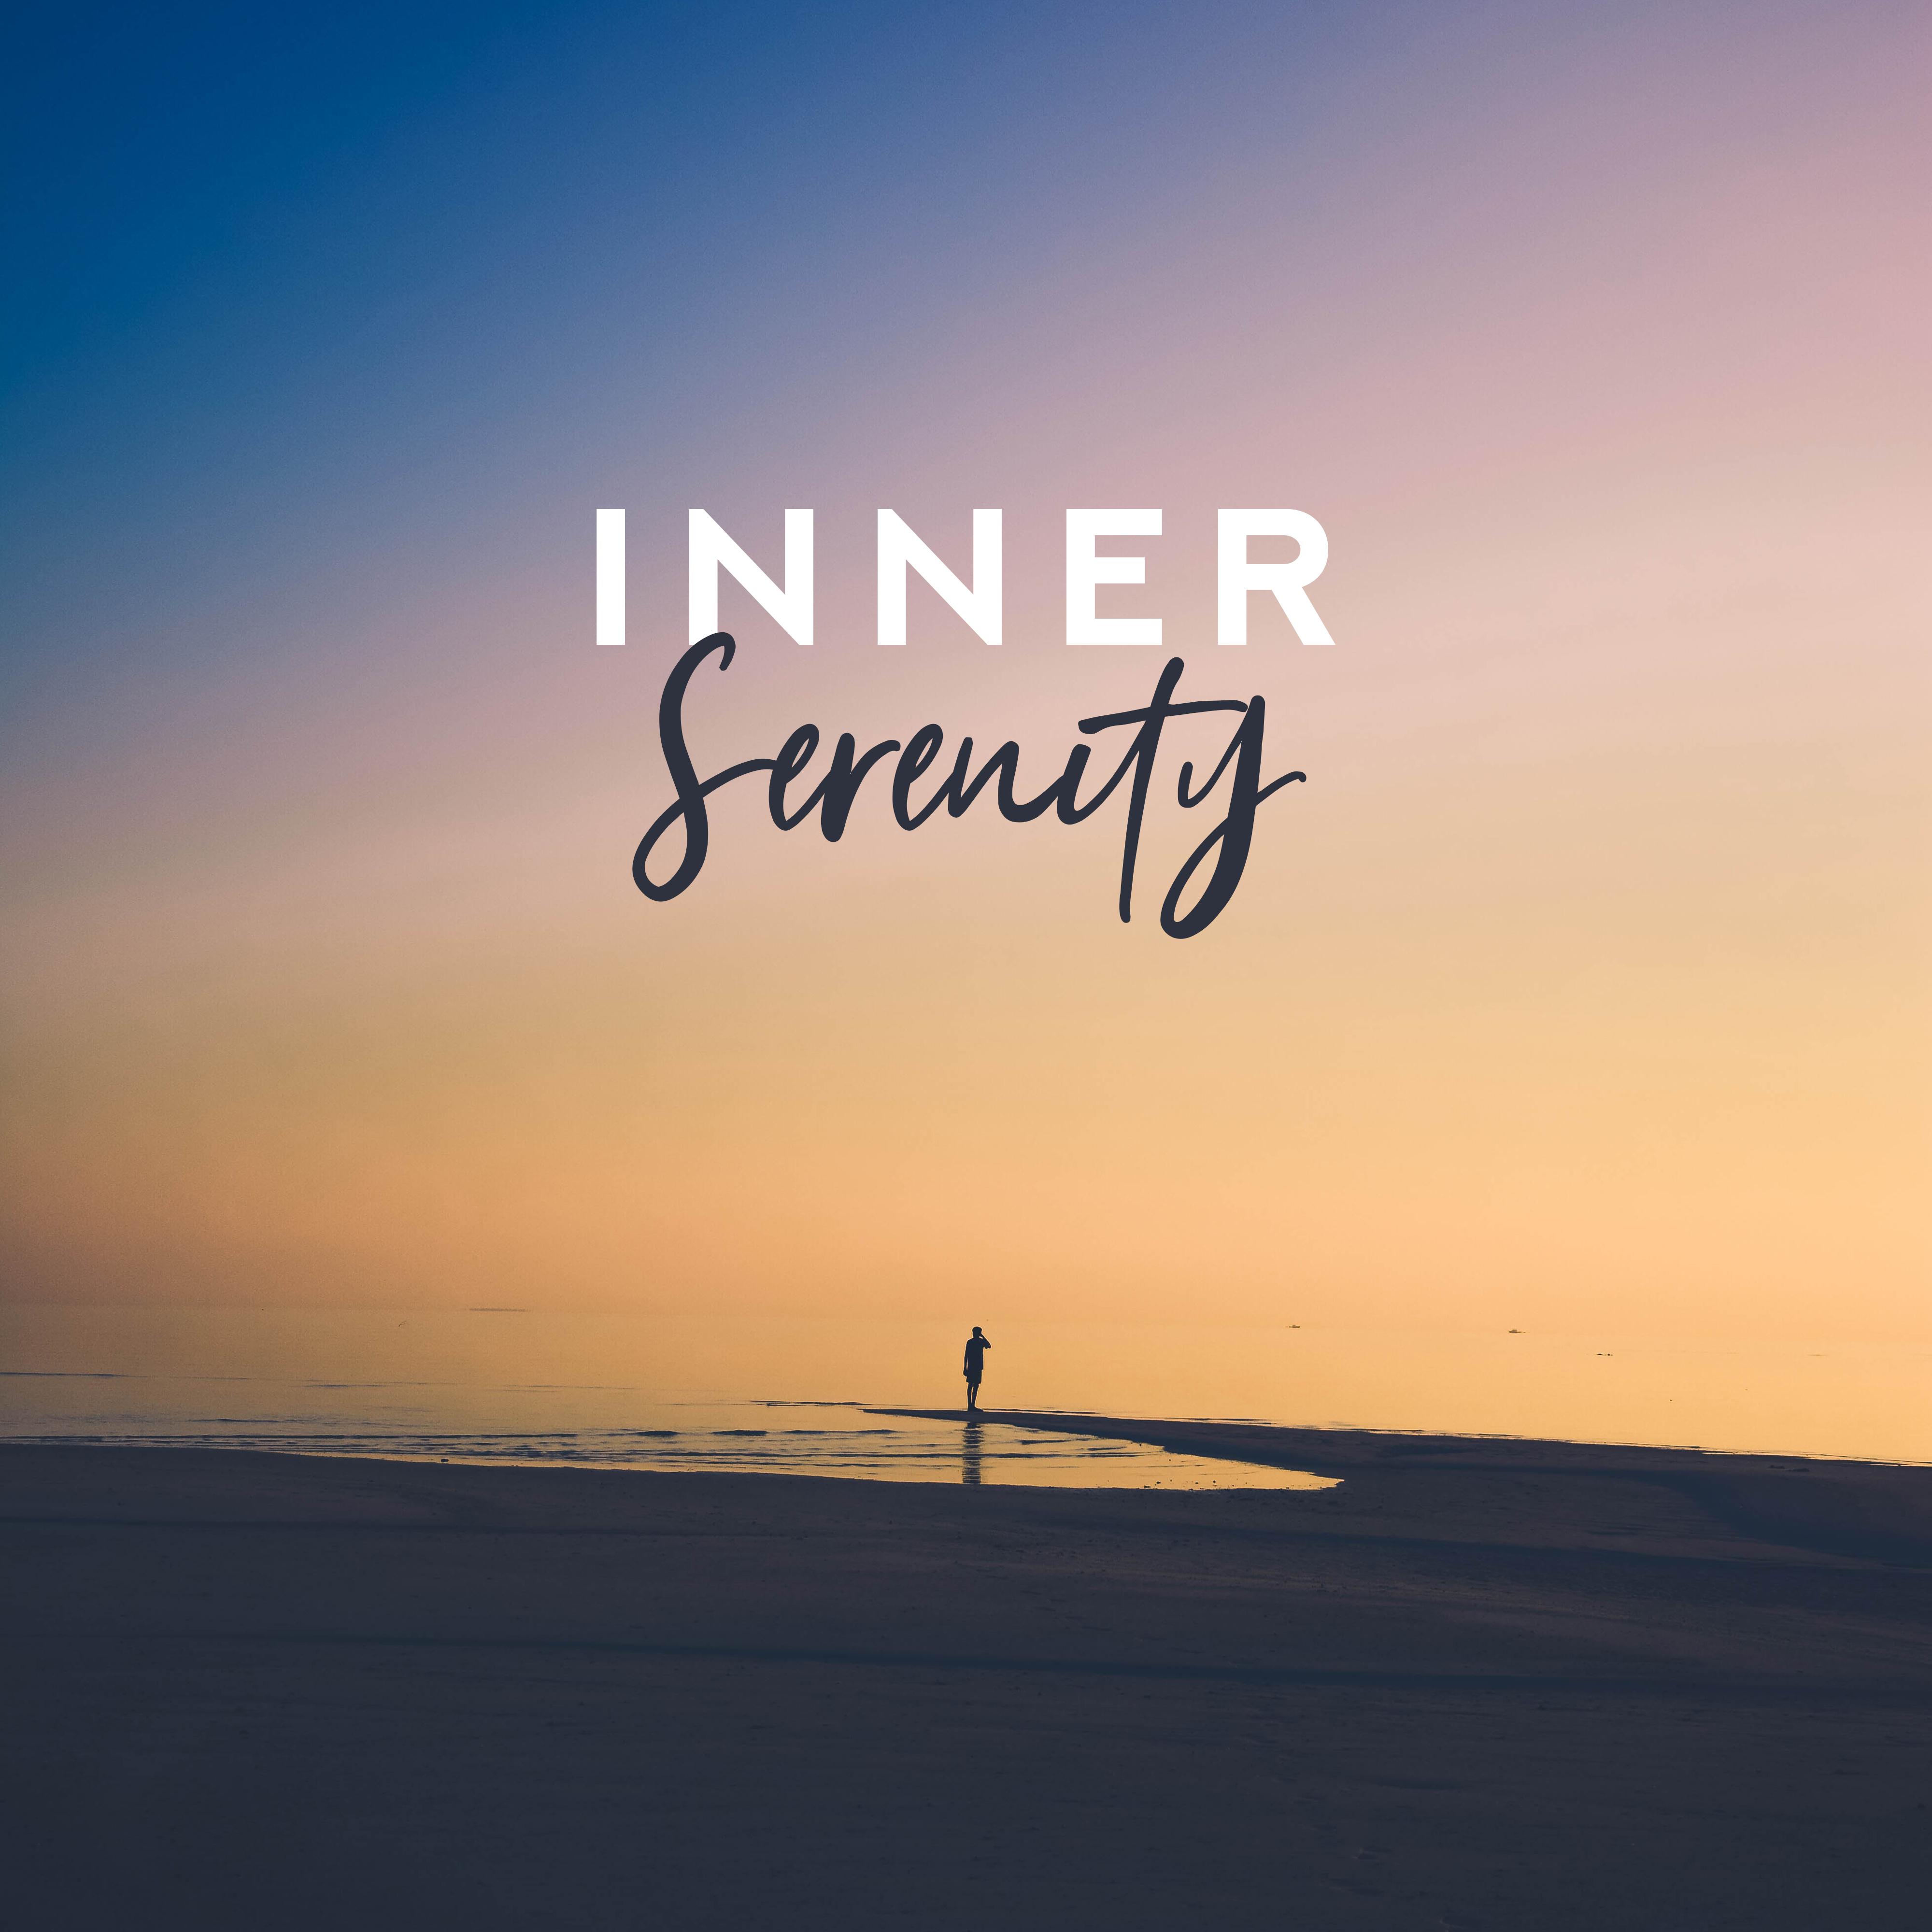 Inner Serenity: Meditation Music That’ll Help You Achieve a State of Being Calm, Peaceful and Untroubled